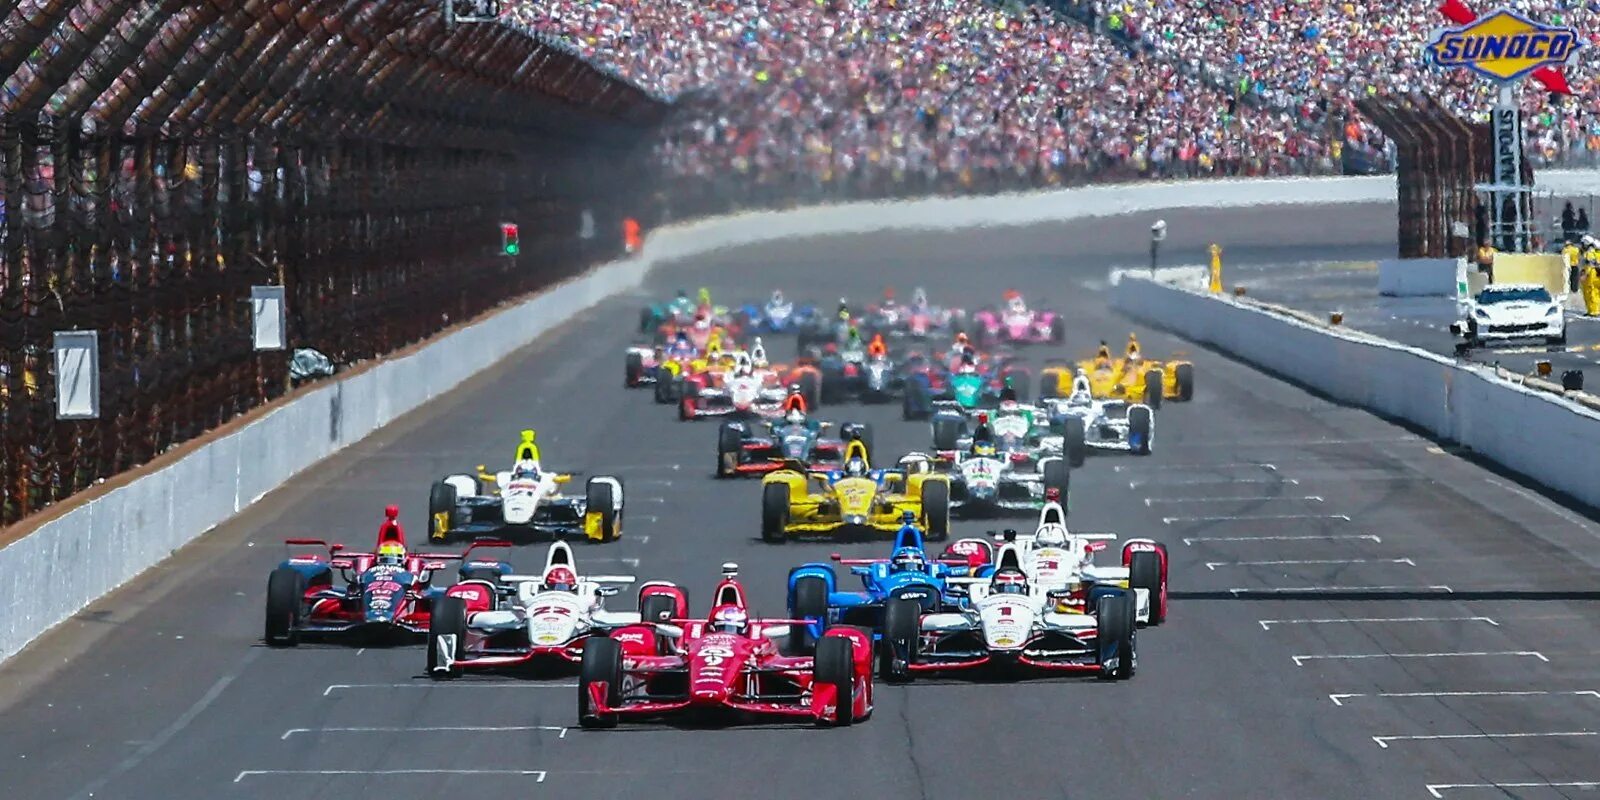 Indianapolis Motor Speedway Indy 500. Инди 500 наскар. Indianapolis 500 наскар. Инди 500 Motor Speedway. Racing mile